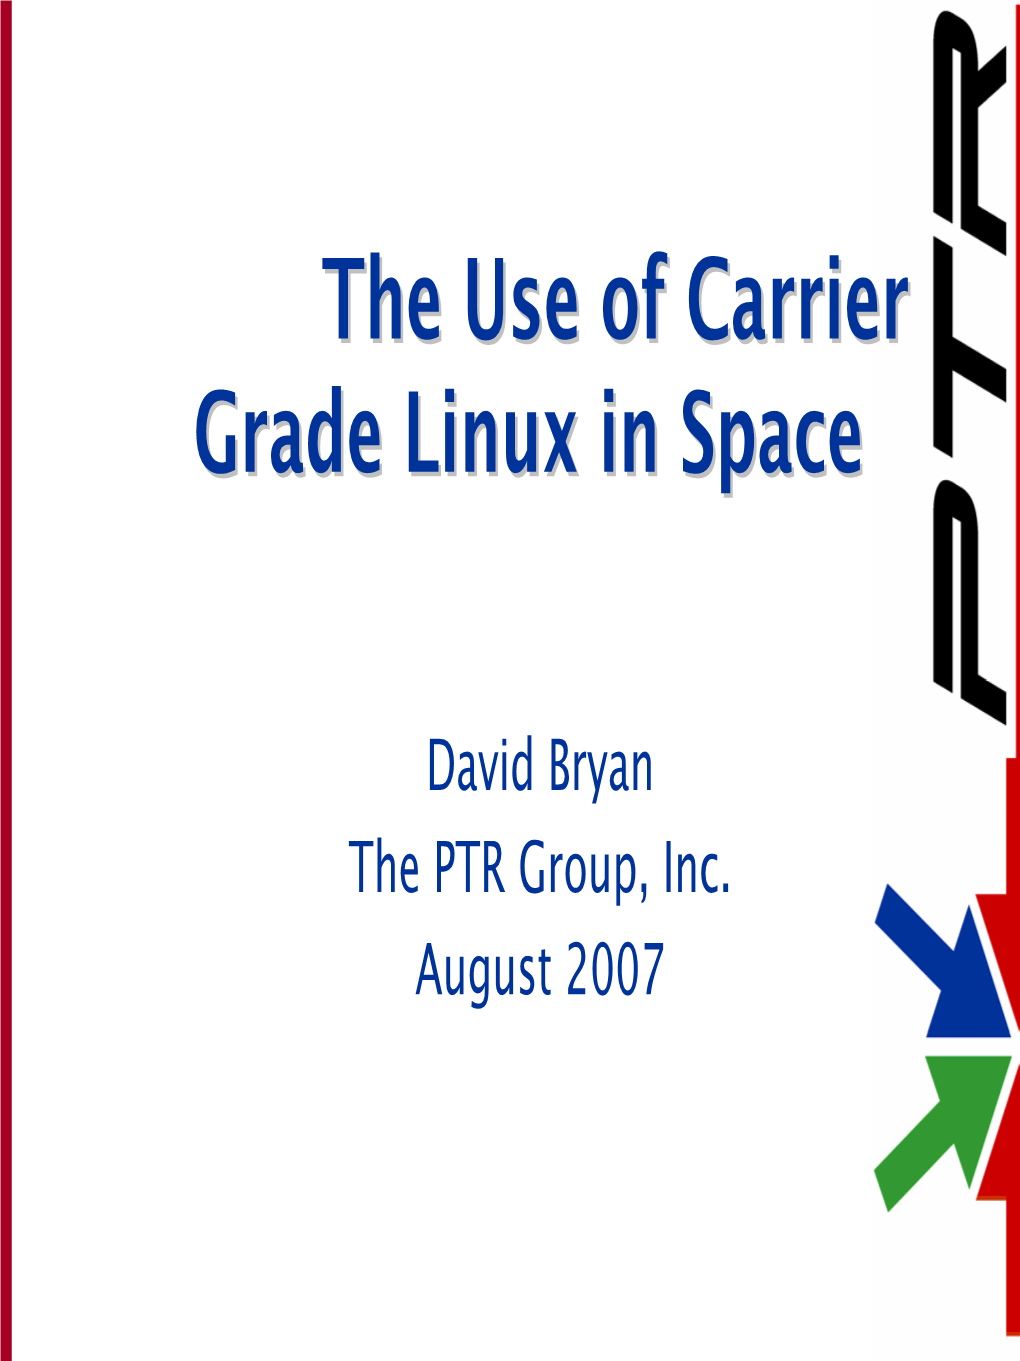 The Use of Carrier Grade Linux in Space